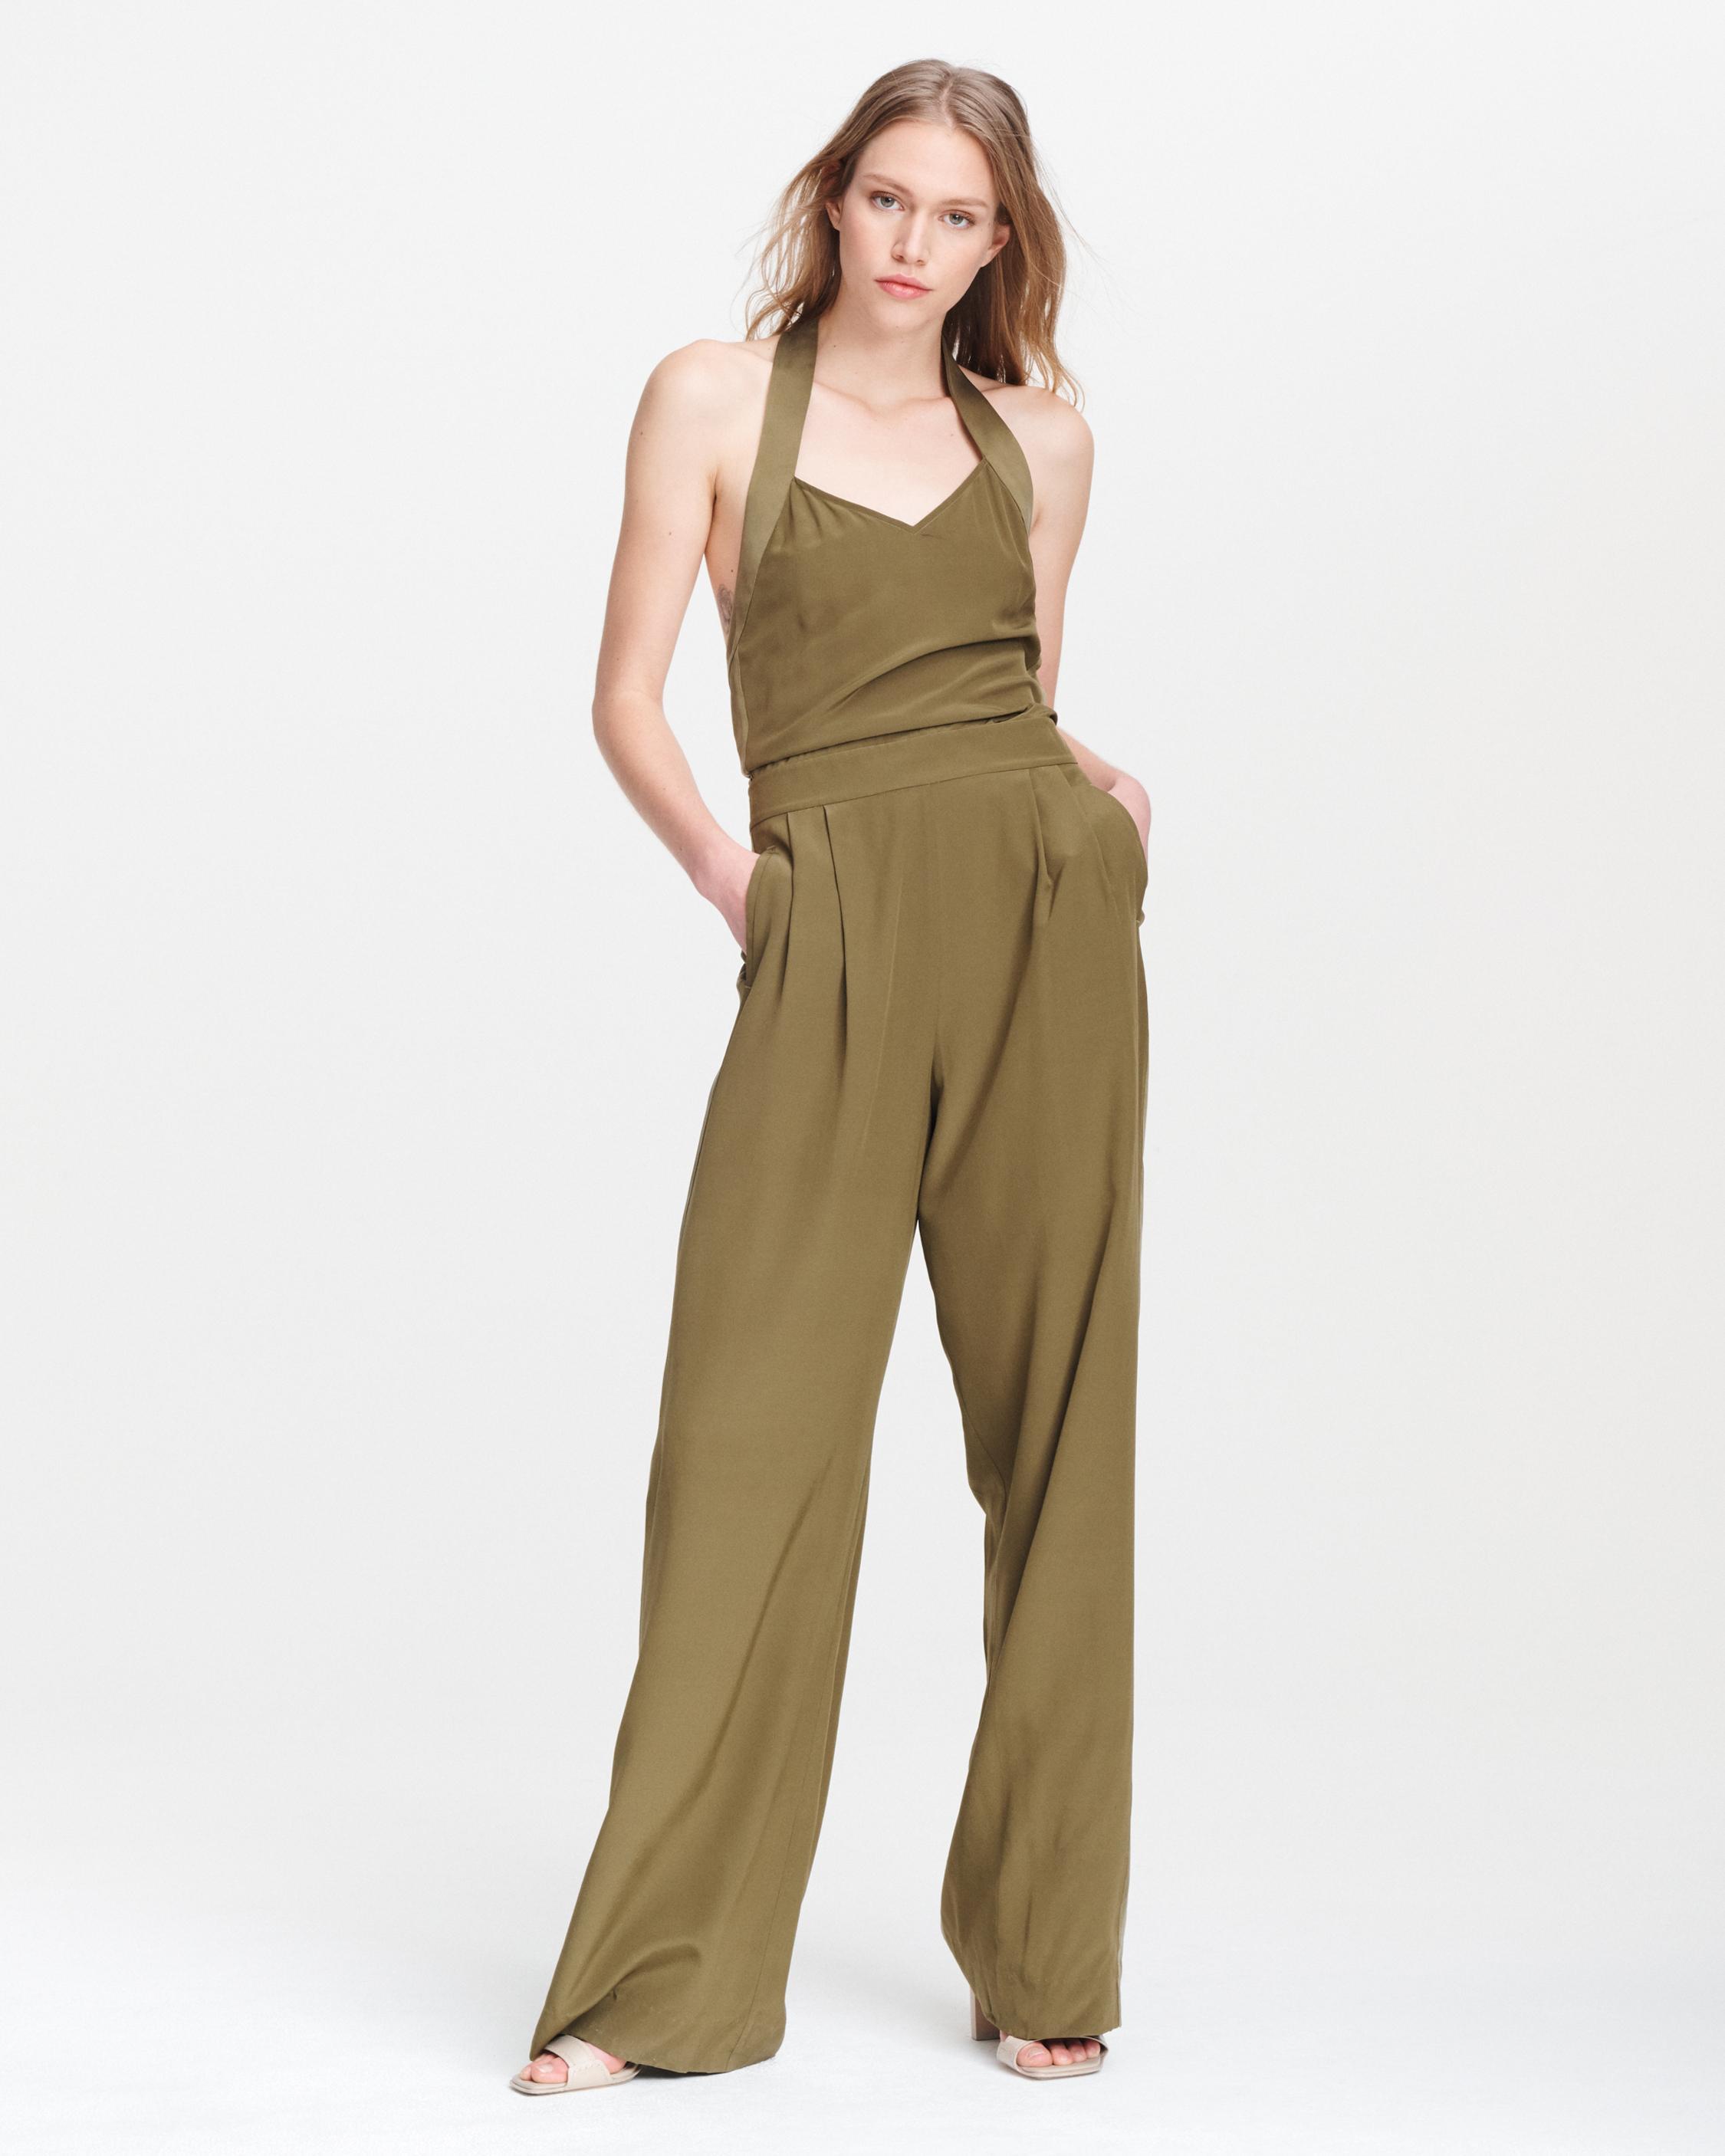 Rag & Bone Silk Scarlet Relaxed Halter Jumpsuit in Army (Green) - Save